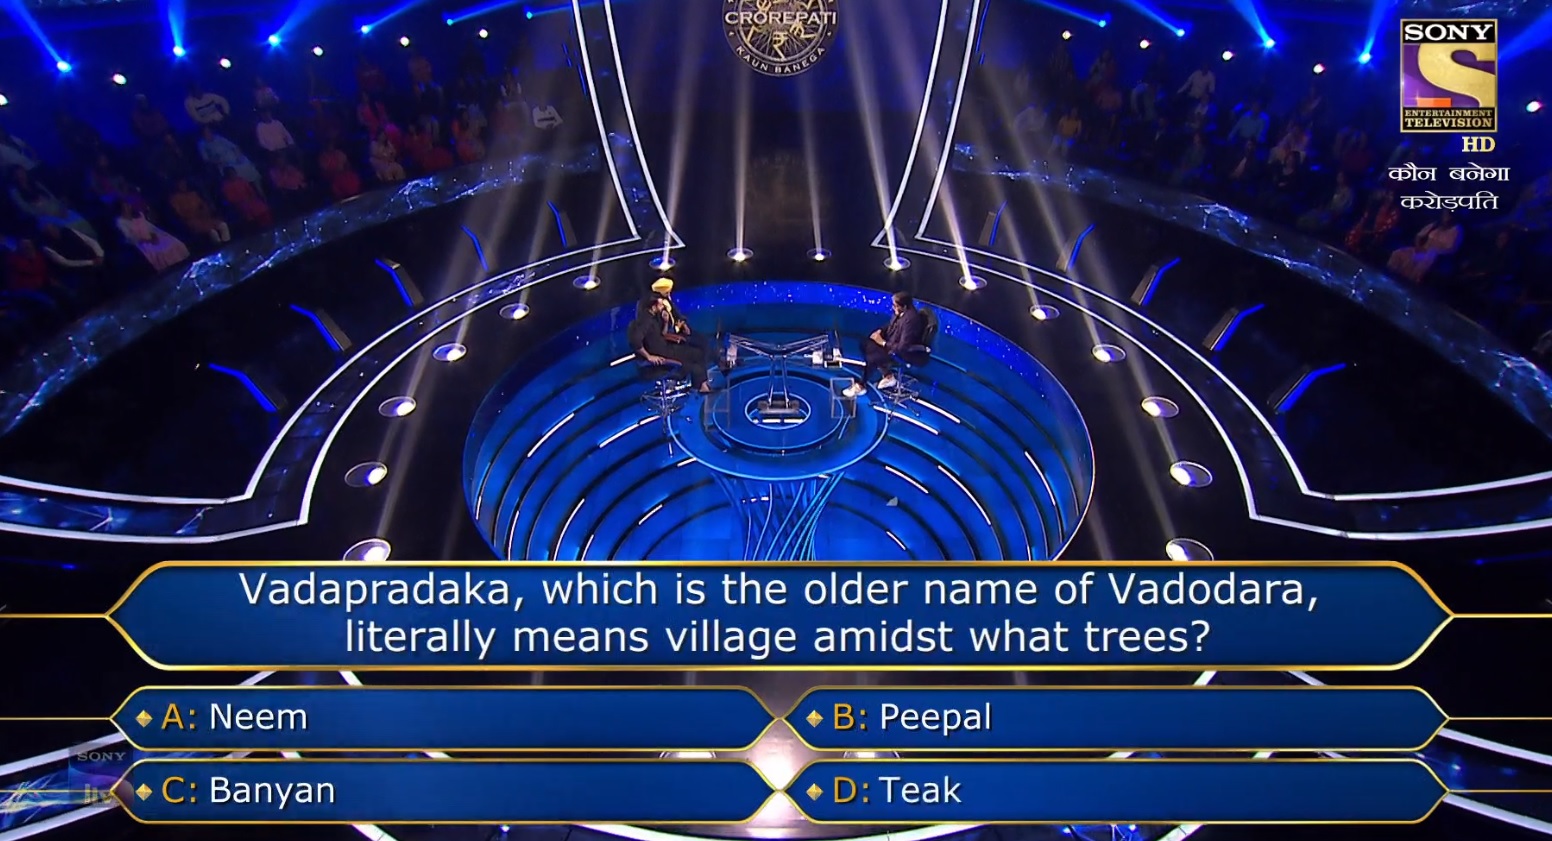 Ques : Vadapradaka, which is the older name of Vadodara, literally means village amidst what trees?